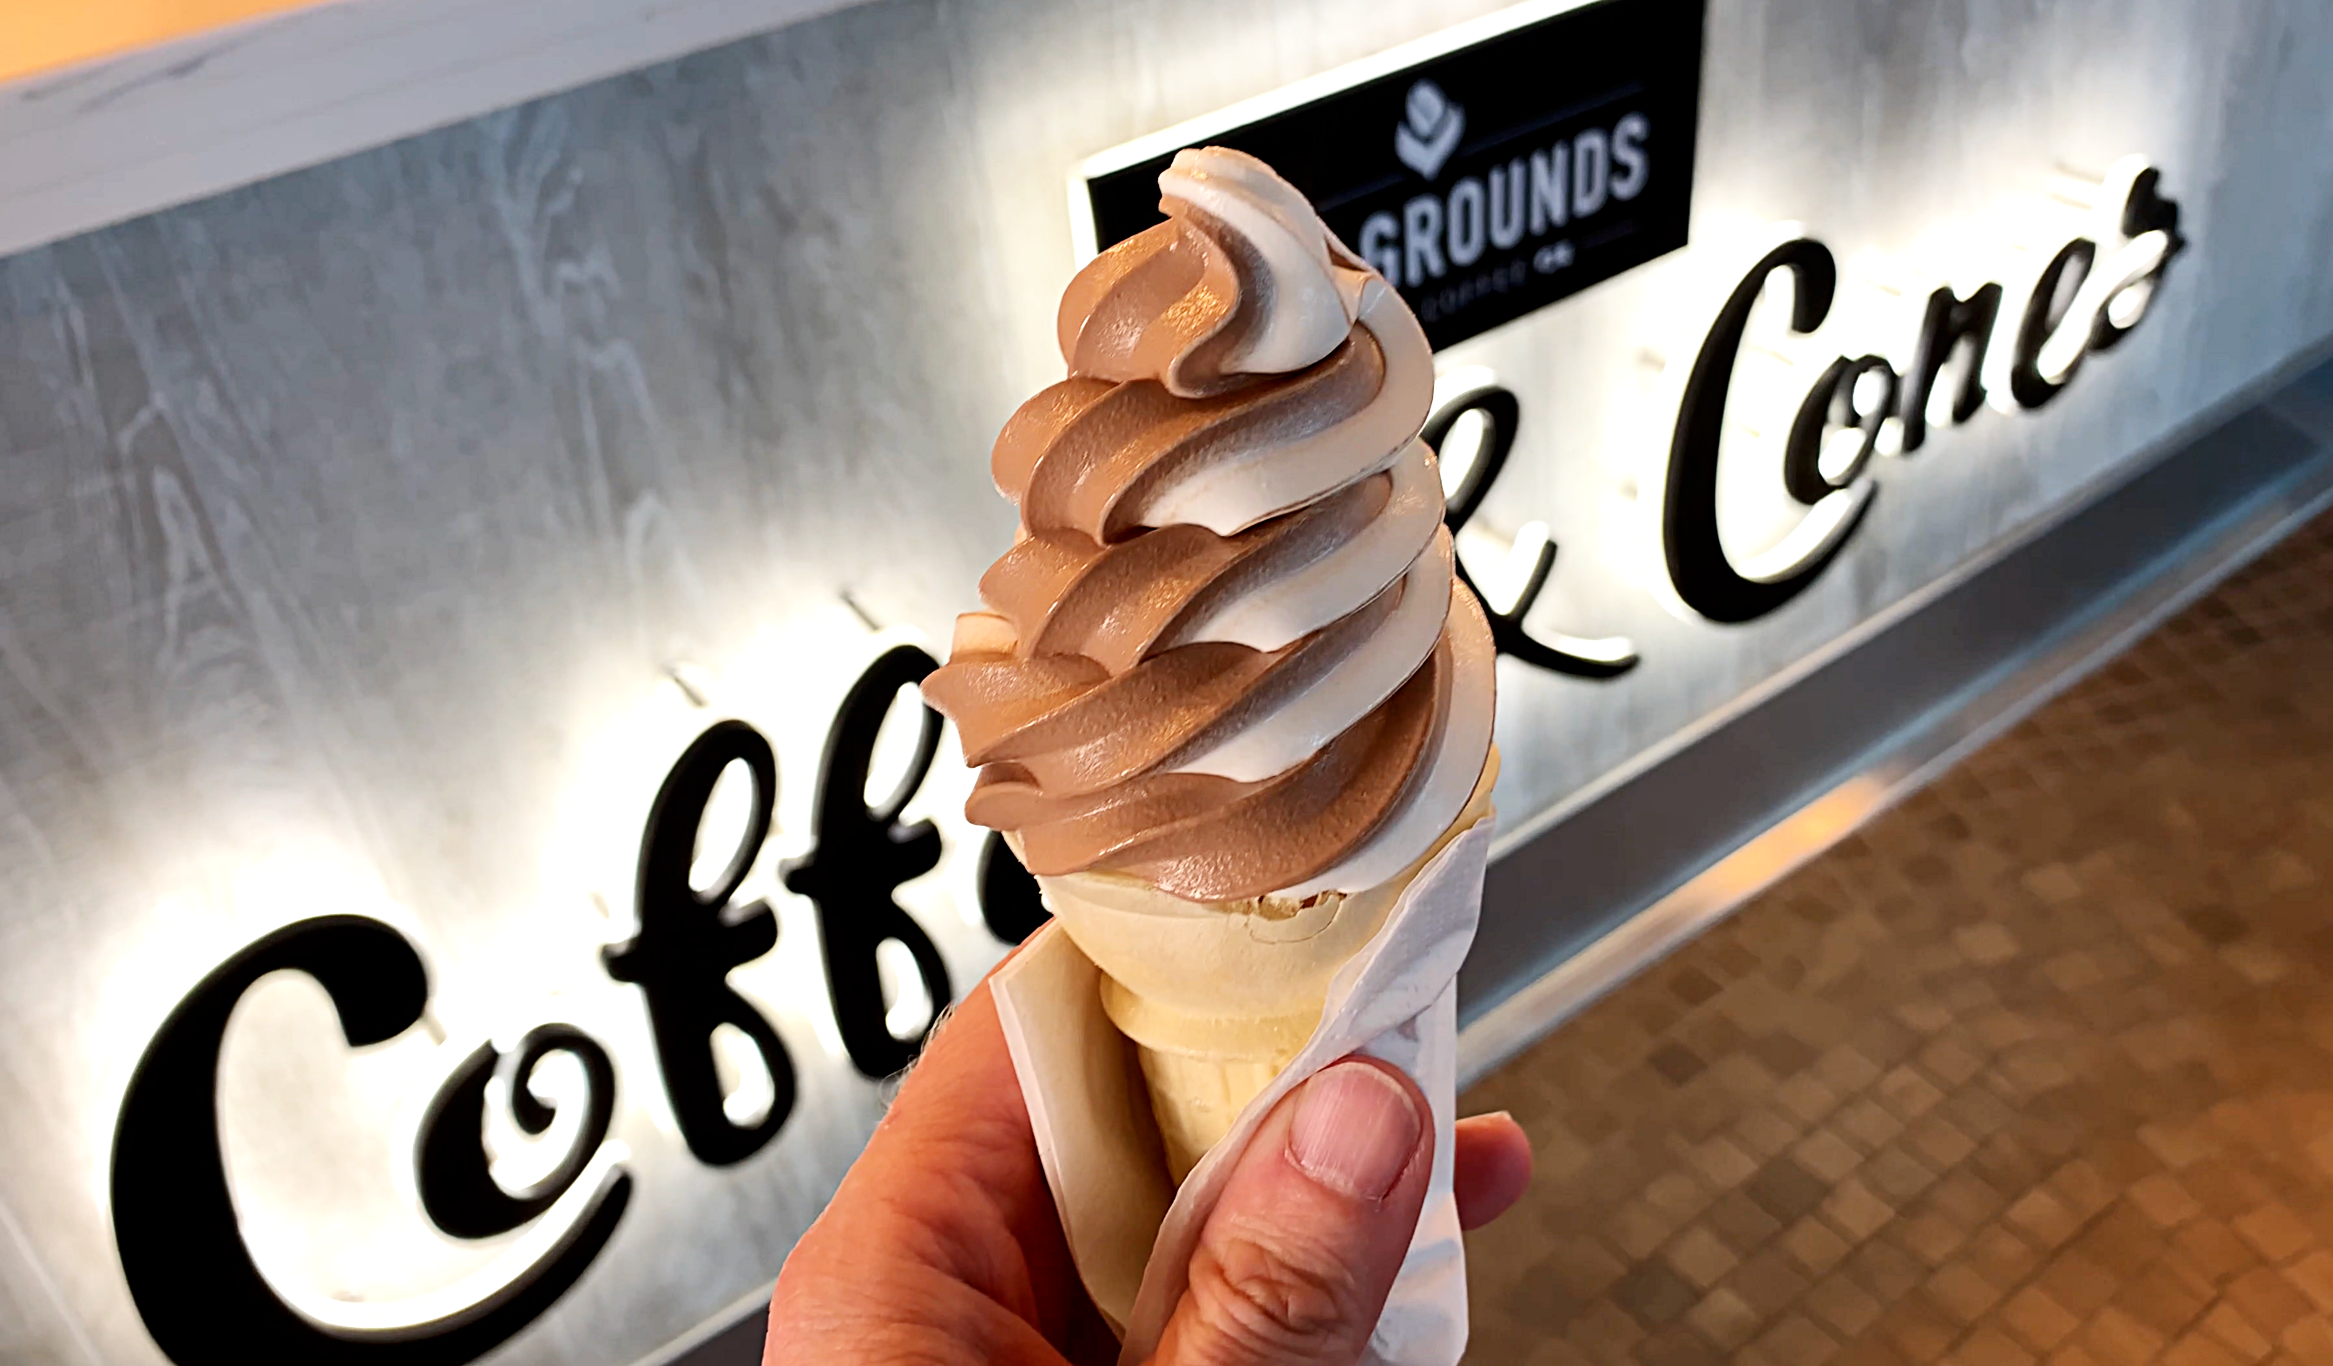  And after a slice of pizza you can grab a complimentary ice cream cone. 